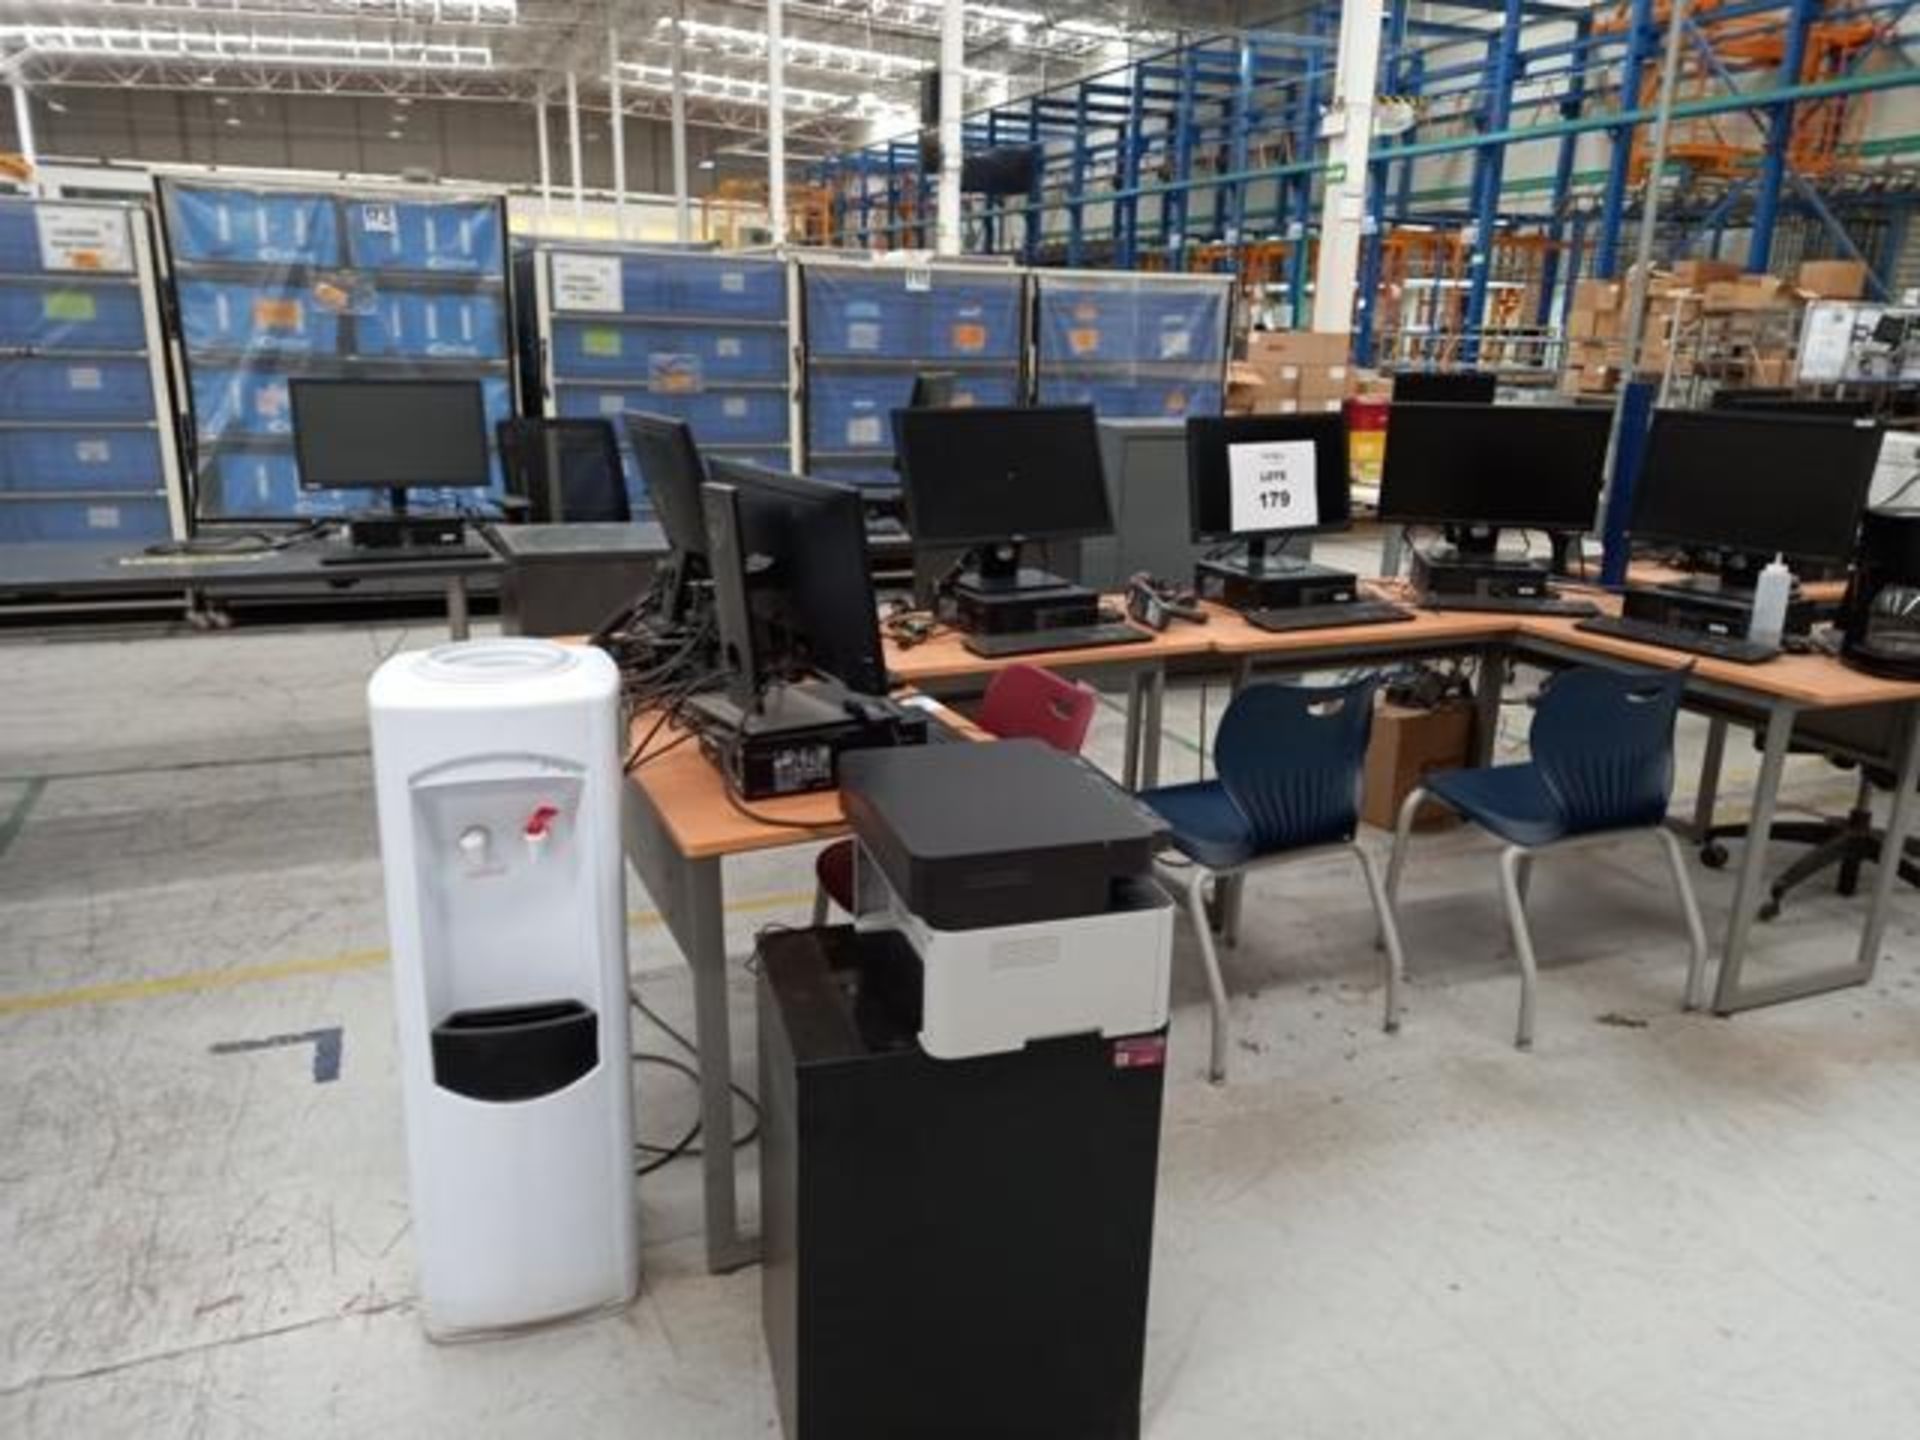 LOT: (66) Of Furniture and Computing Equipment Consisting of: Computers, Printers, Desks, Chairs, Dr - Image 22 of 38